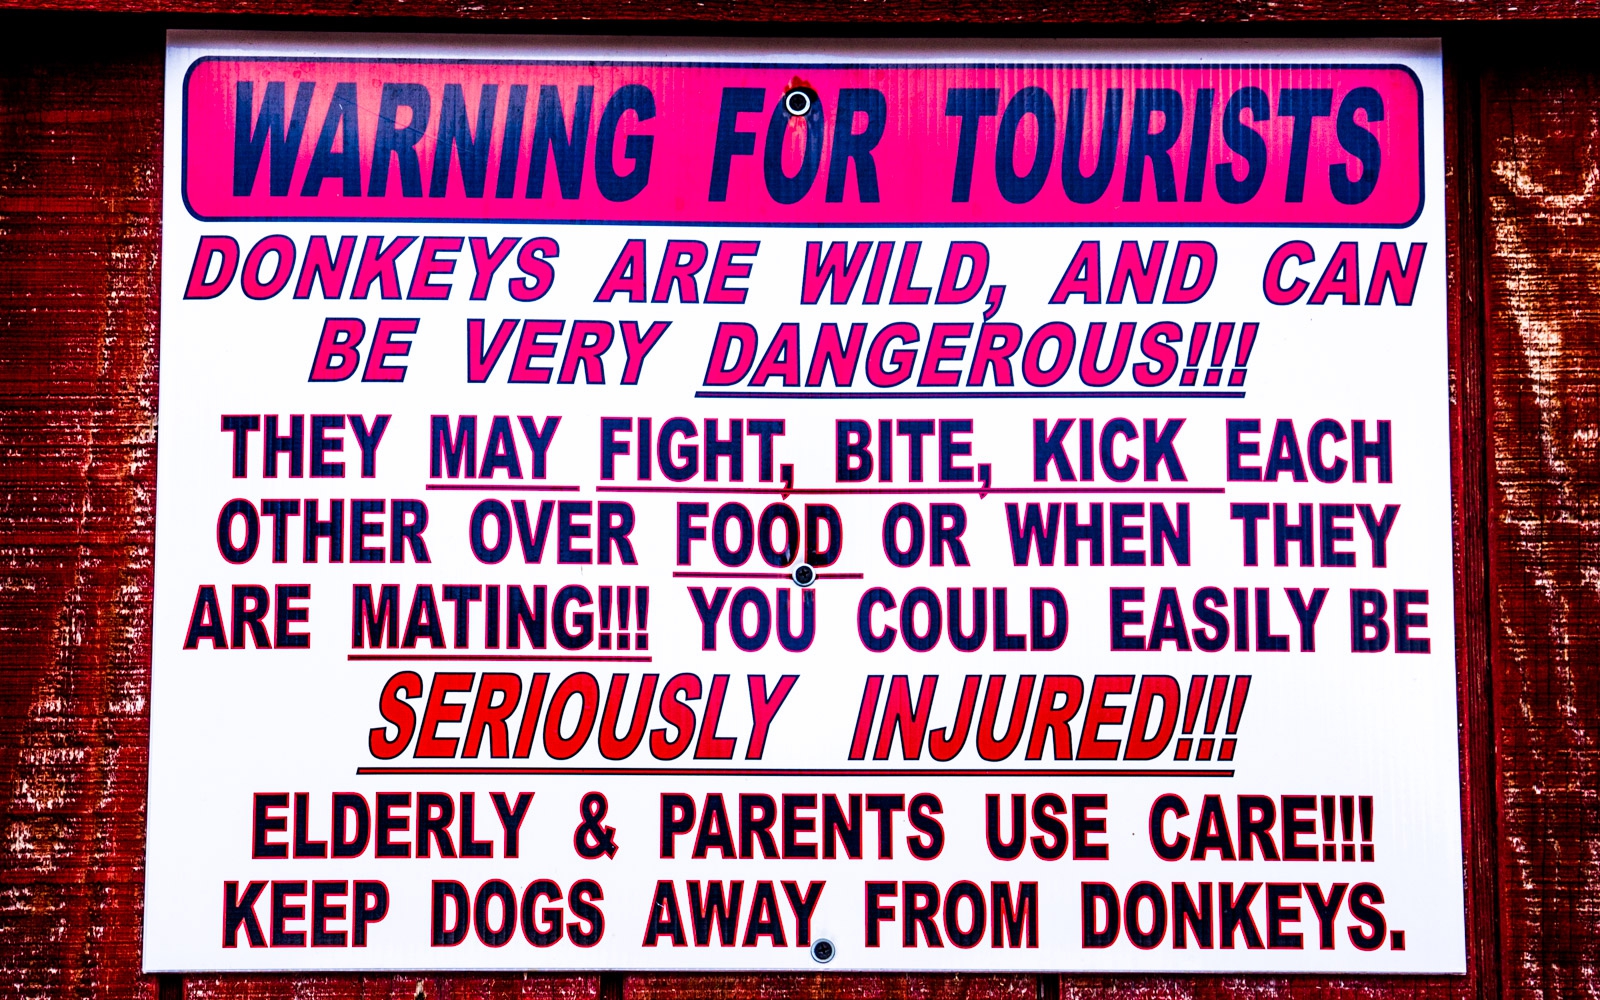 Warning for tourists